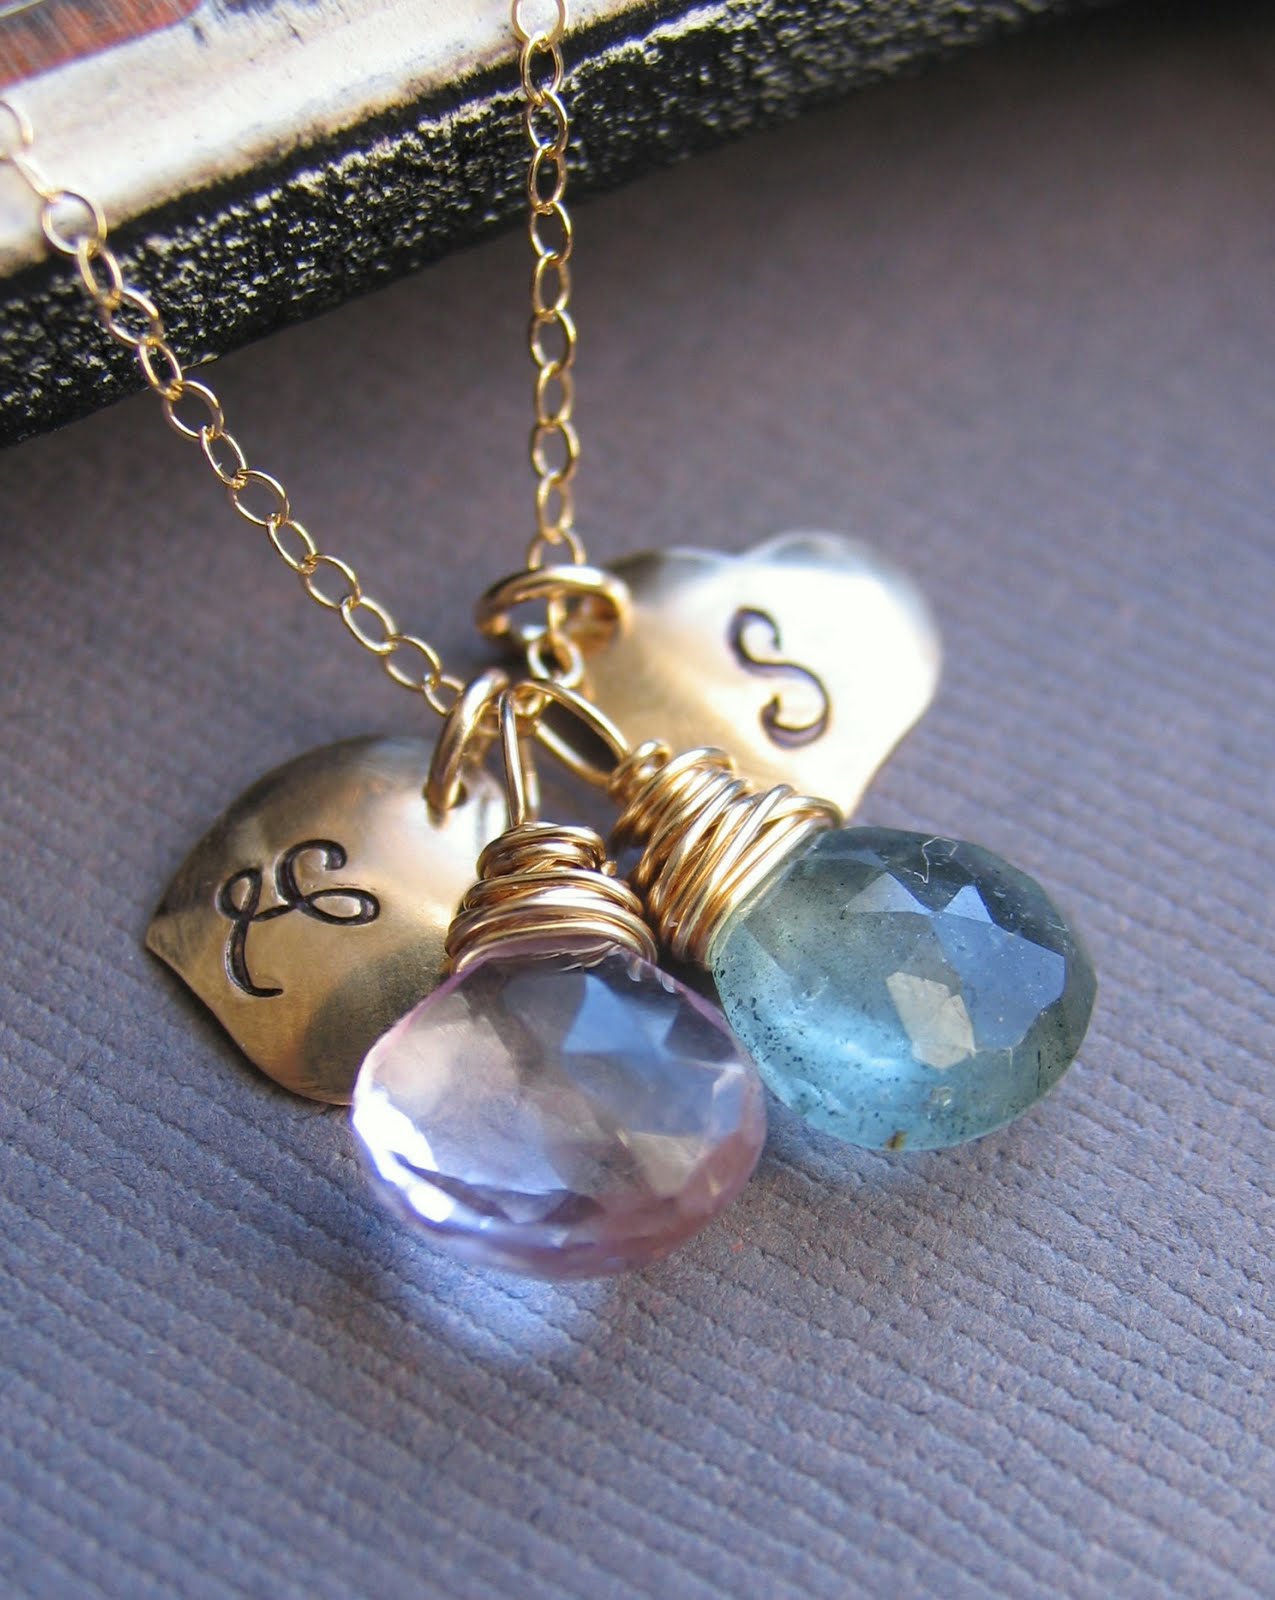 Nature Inspired Handcrafted Jewelry: Personalized Necklaces going fast!